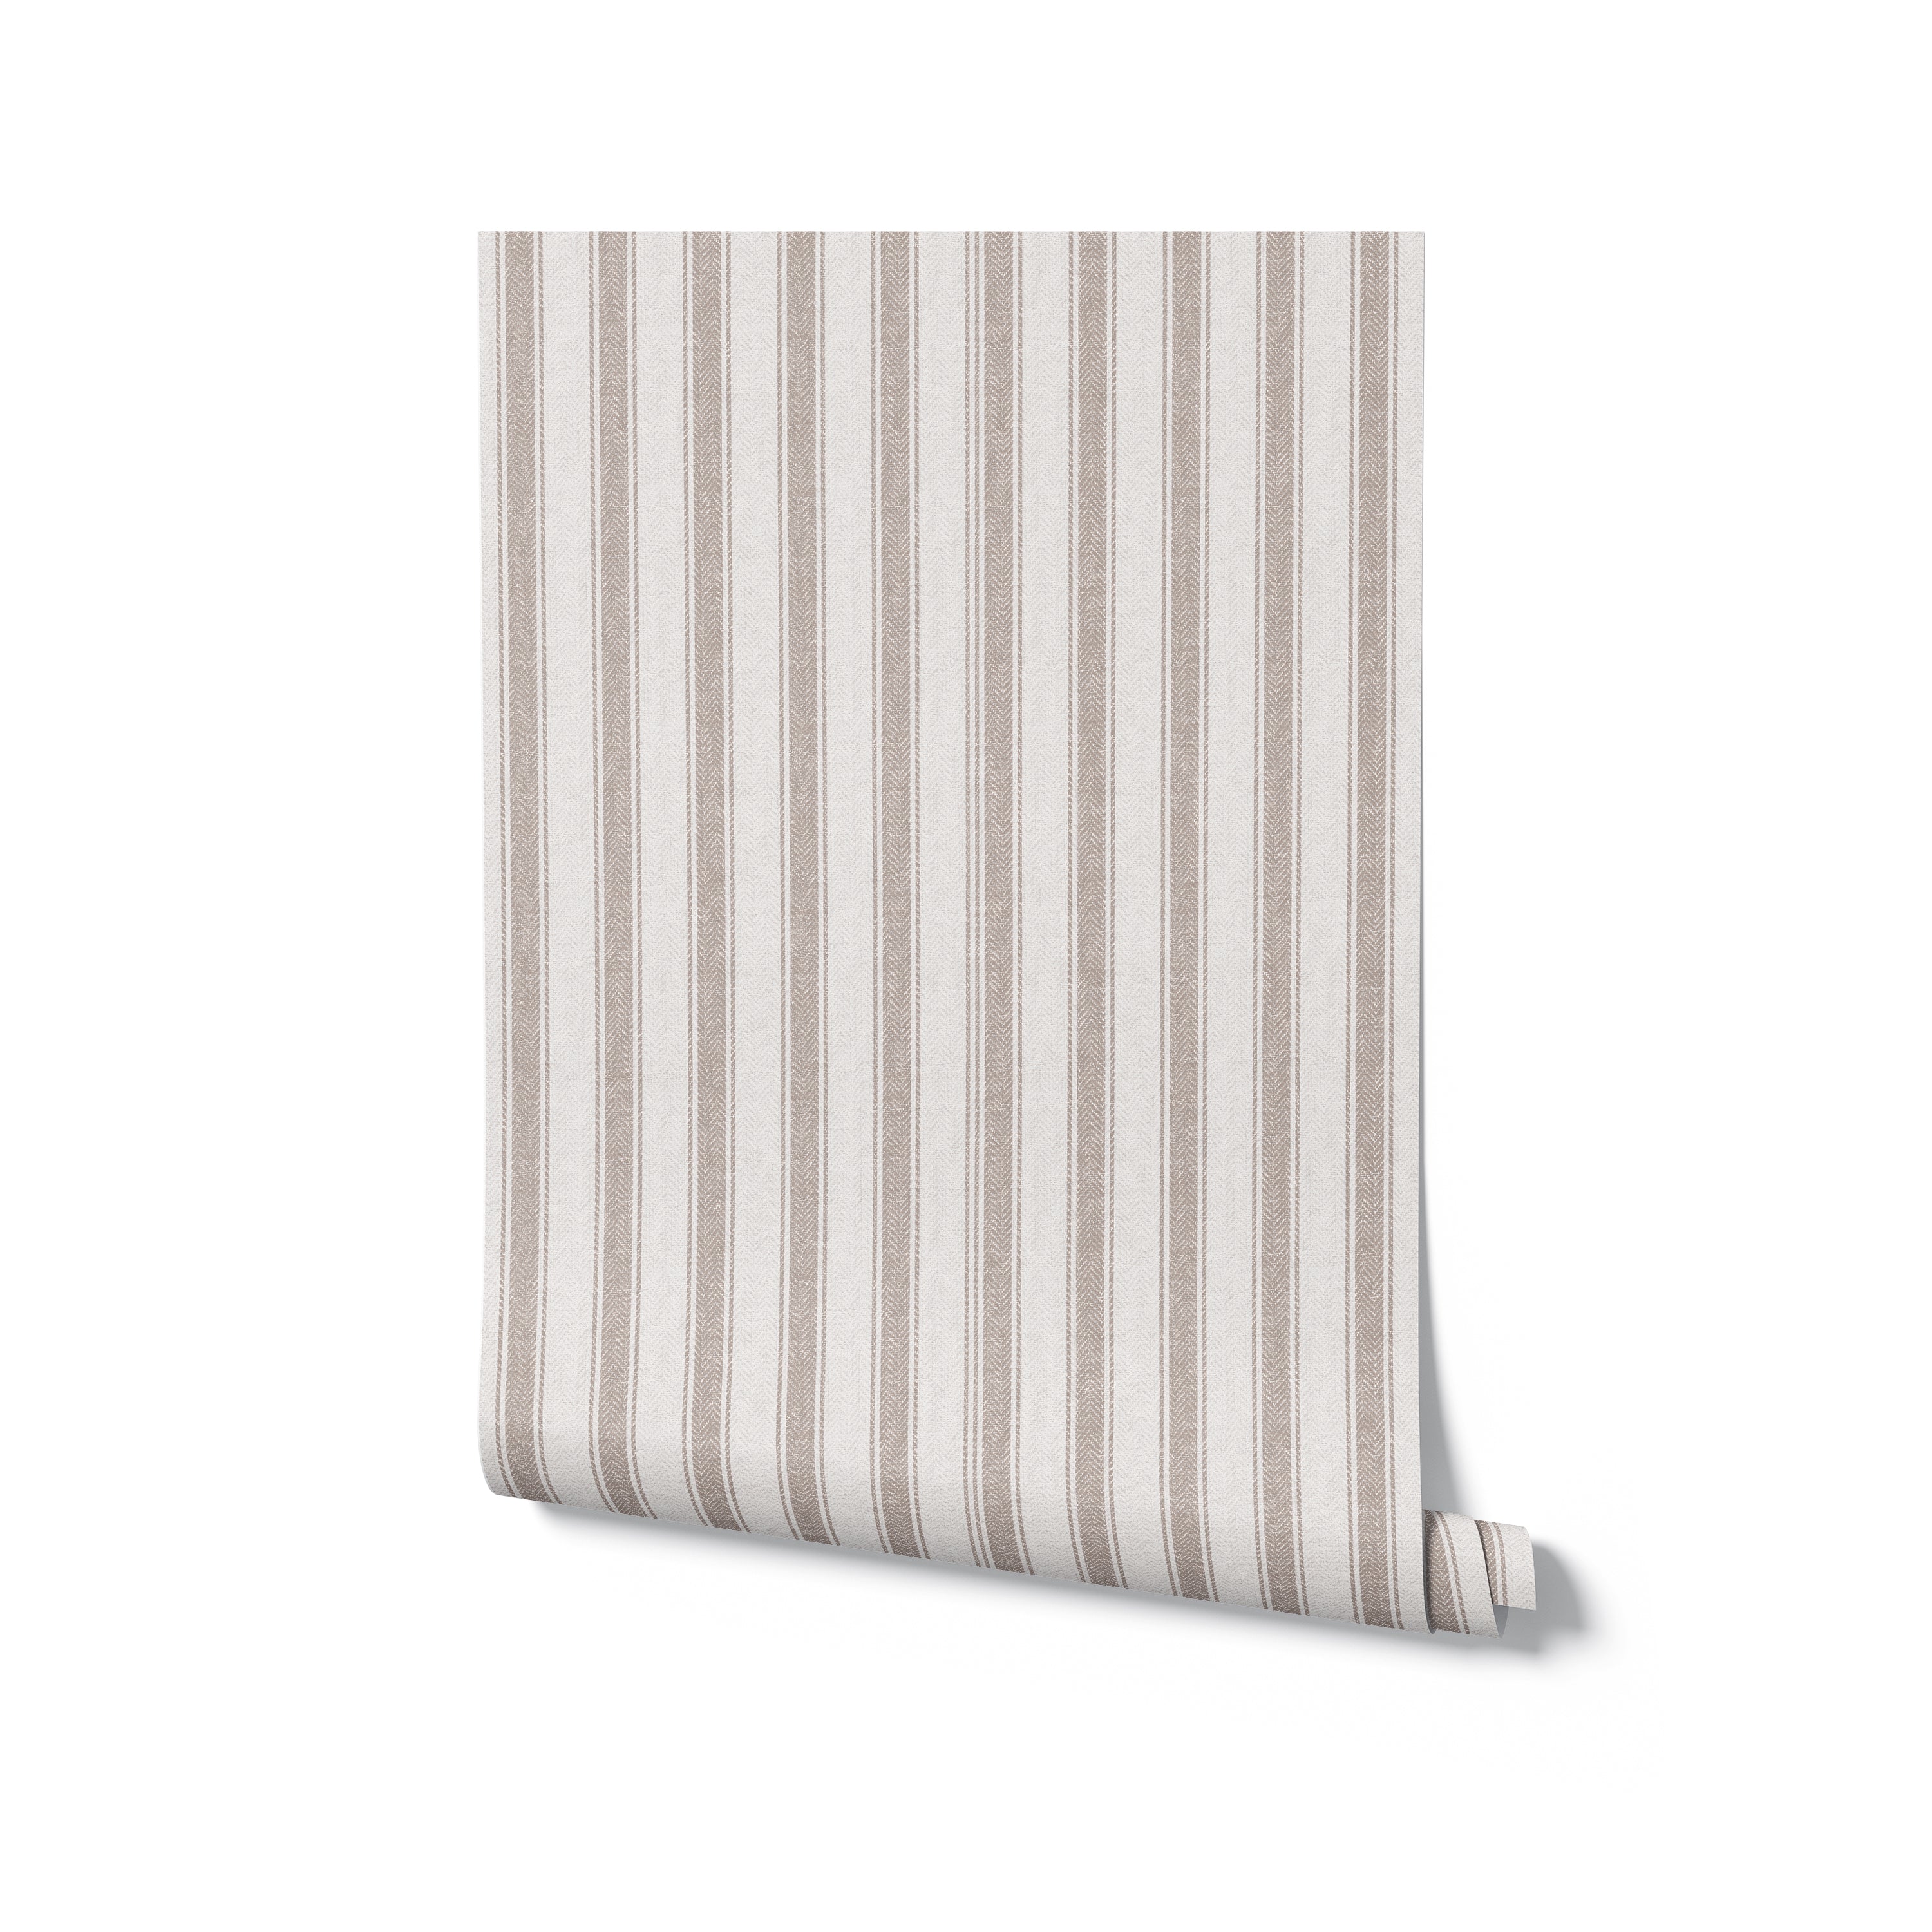 A roll of Striped Fabric Wallpaper presented against a white background, showcasing the gentle tan and cream stripes that offer a sophisticated fabric-like texture, perfect for creating a statement wall or a complete room makeover,  beige